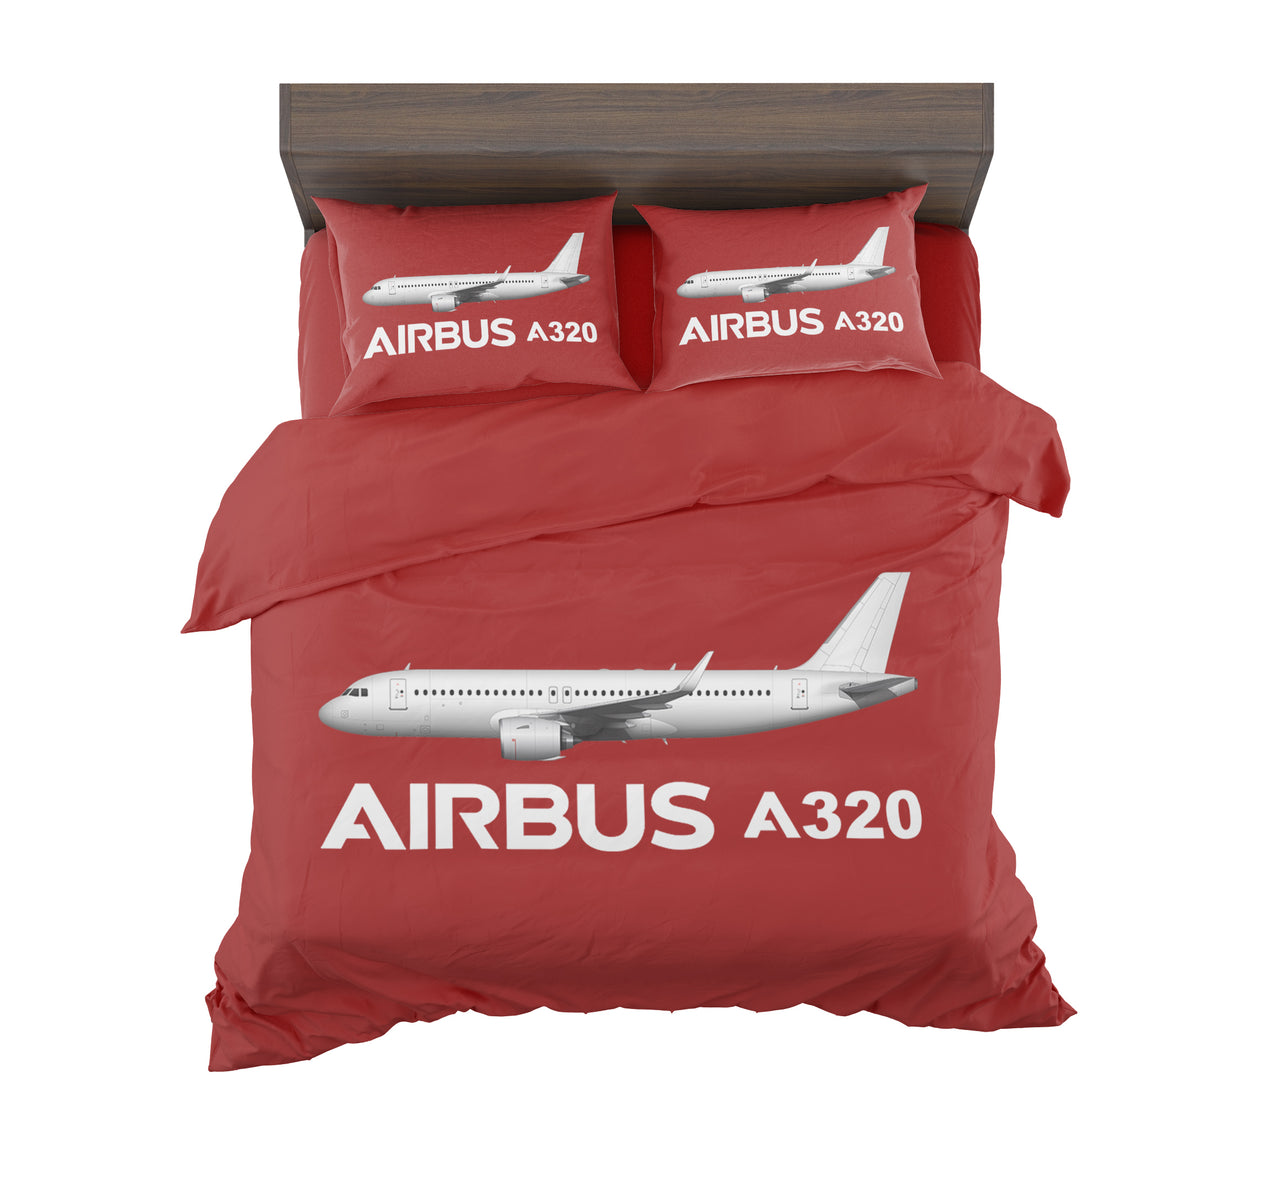 The Airbus A320 Designed Bedding Sets